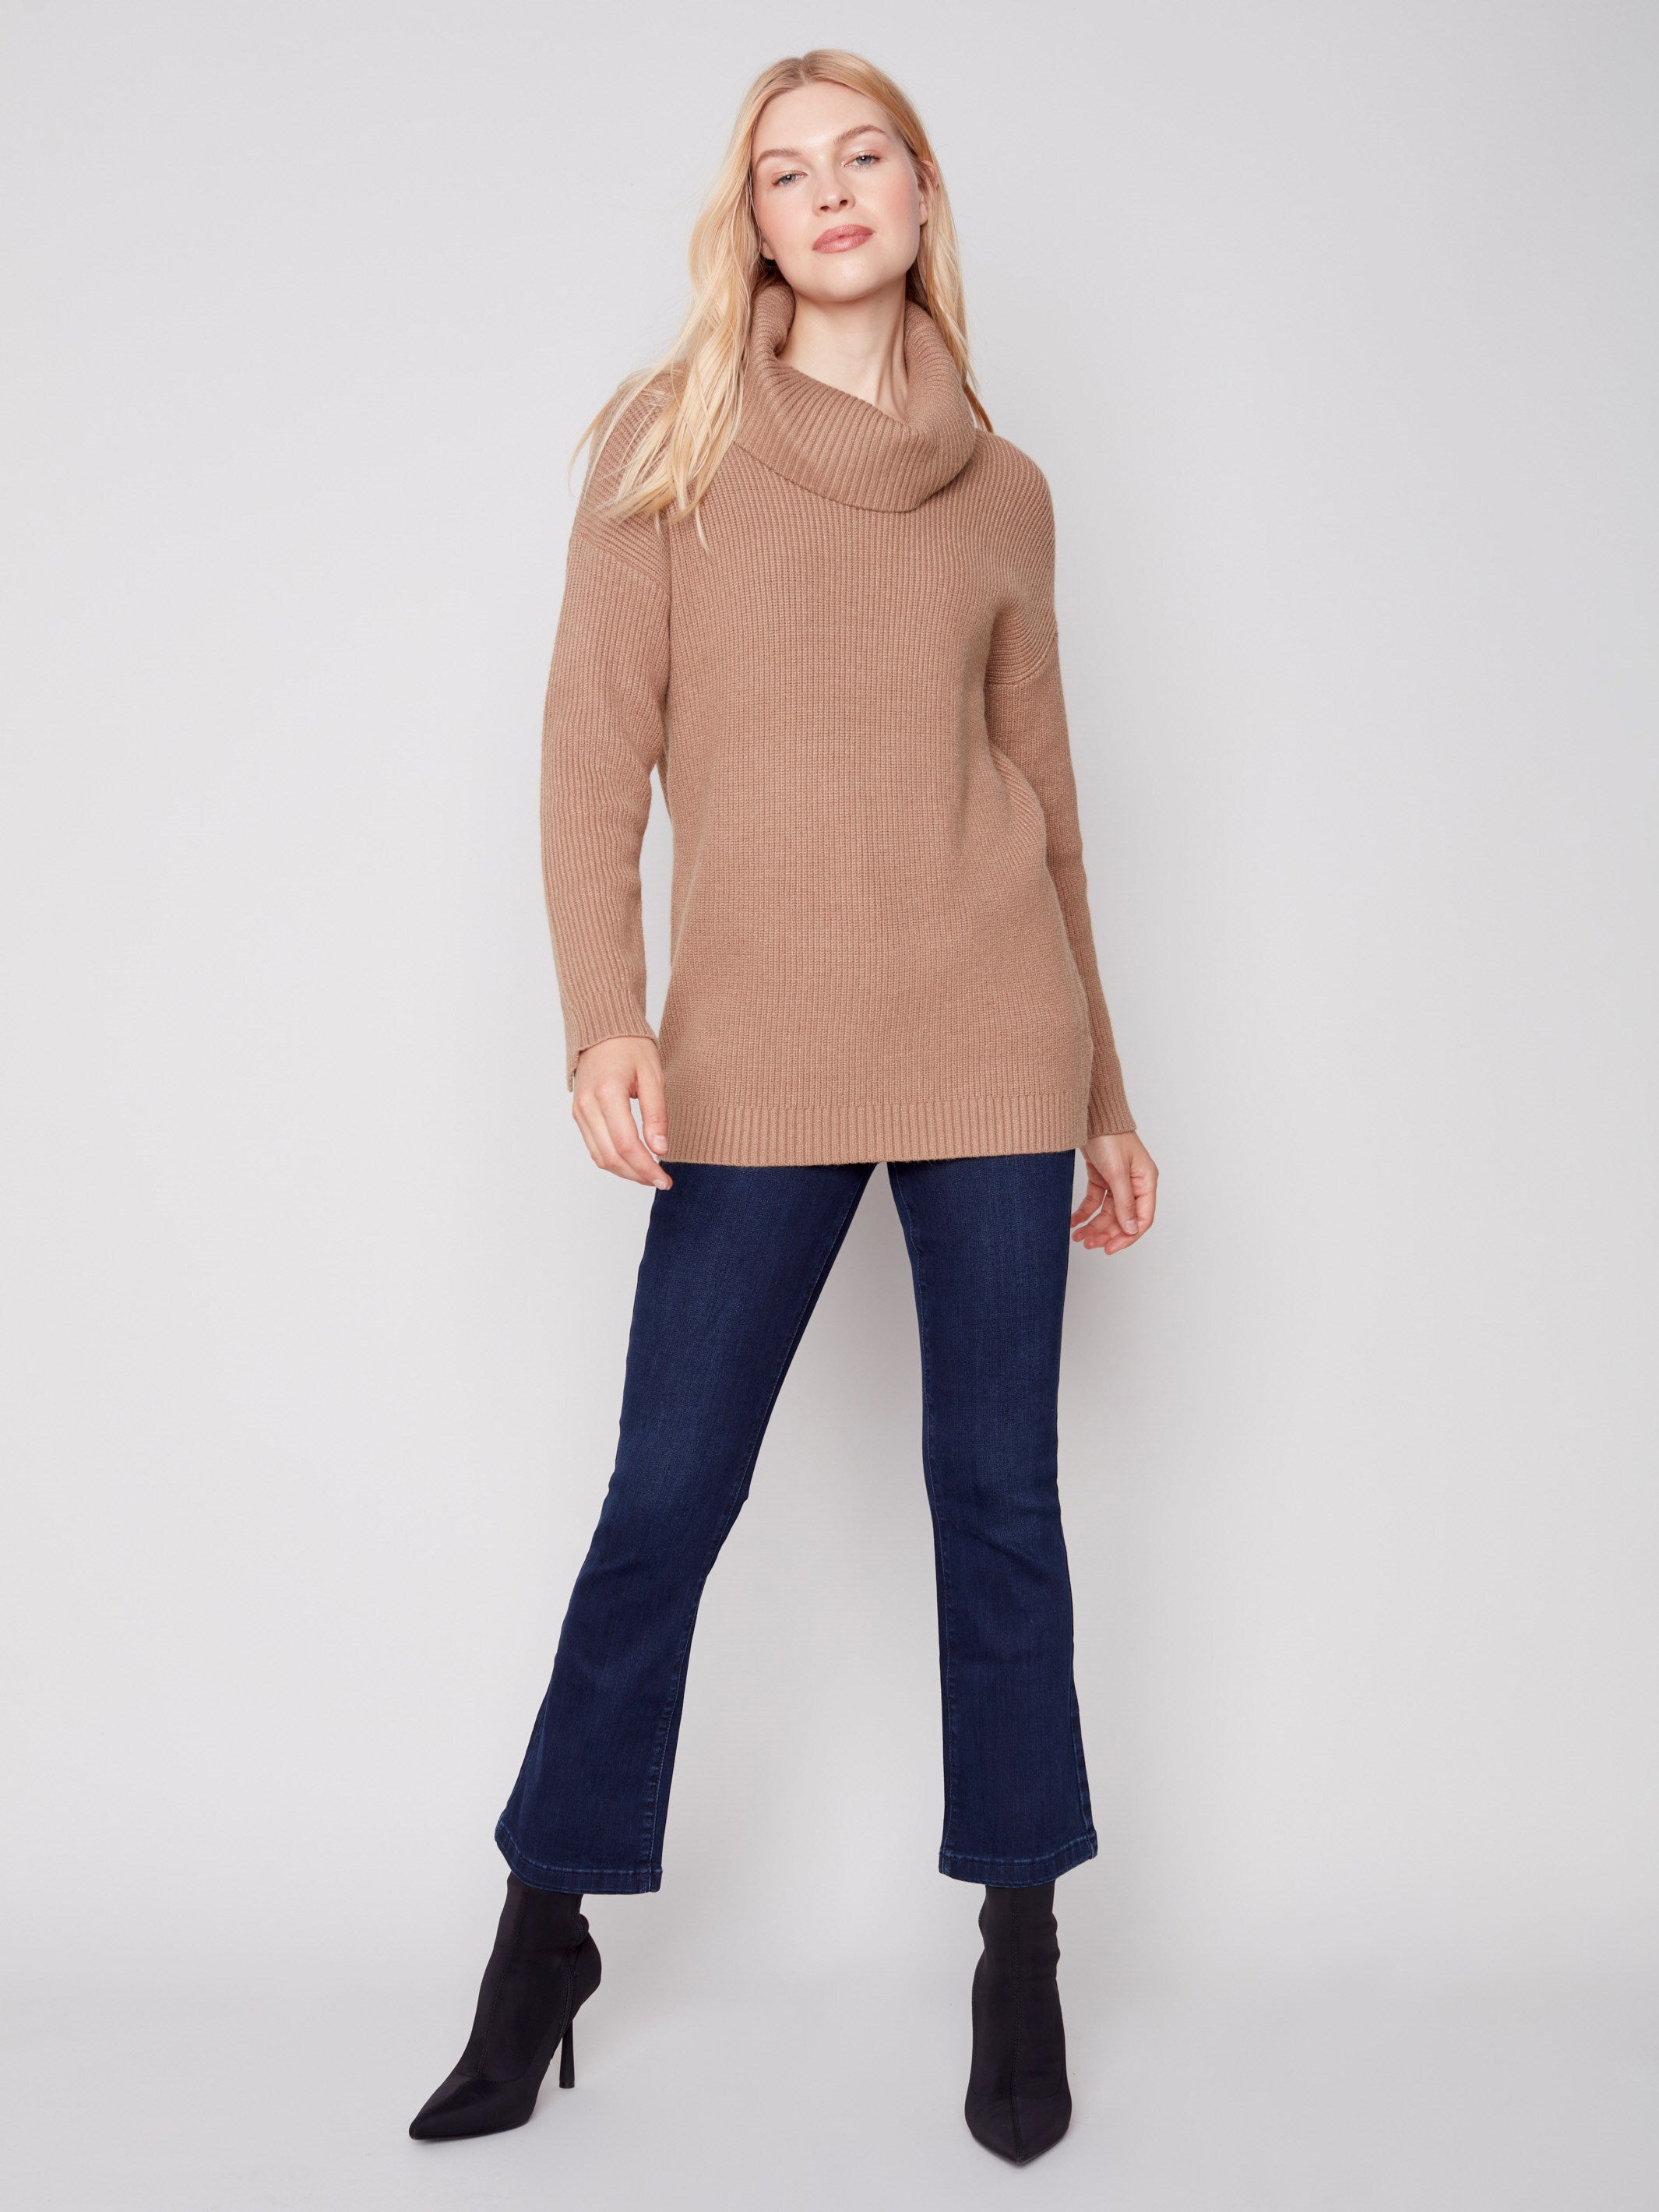 Cowl Neck Sweater with Button Detail - Truffle